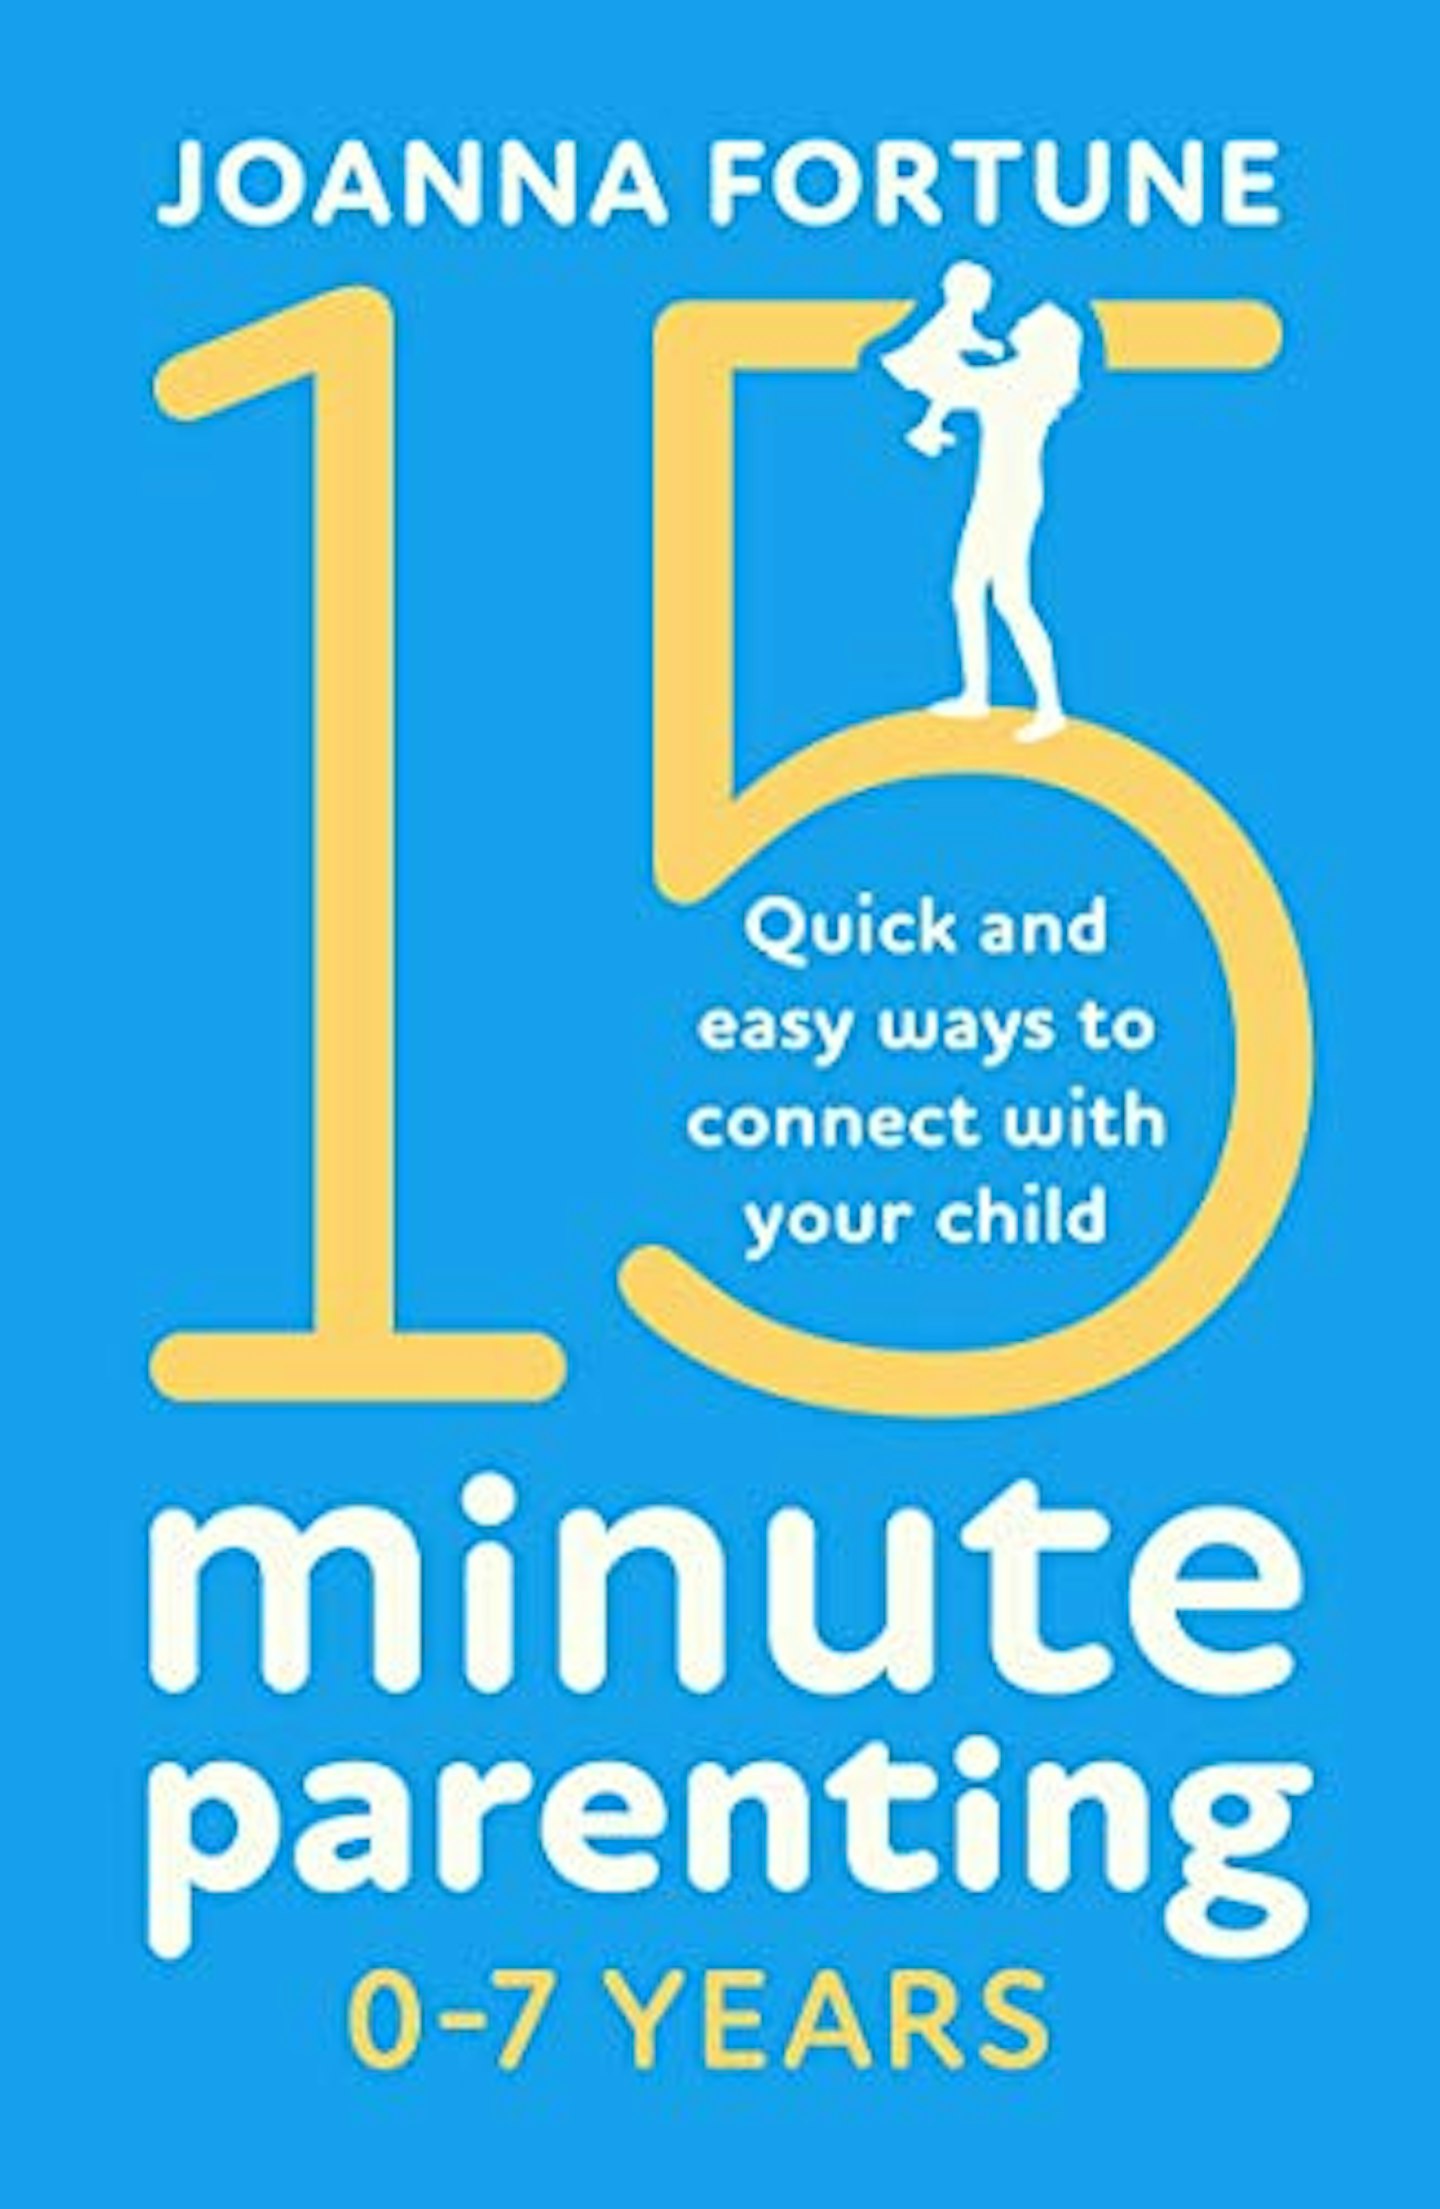 15- Minute Parenting 0-7 Years: Quick and easy ways to connect with your child by Joanna Fortune